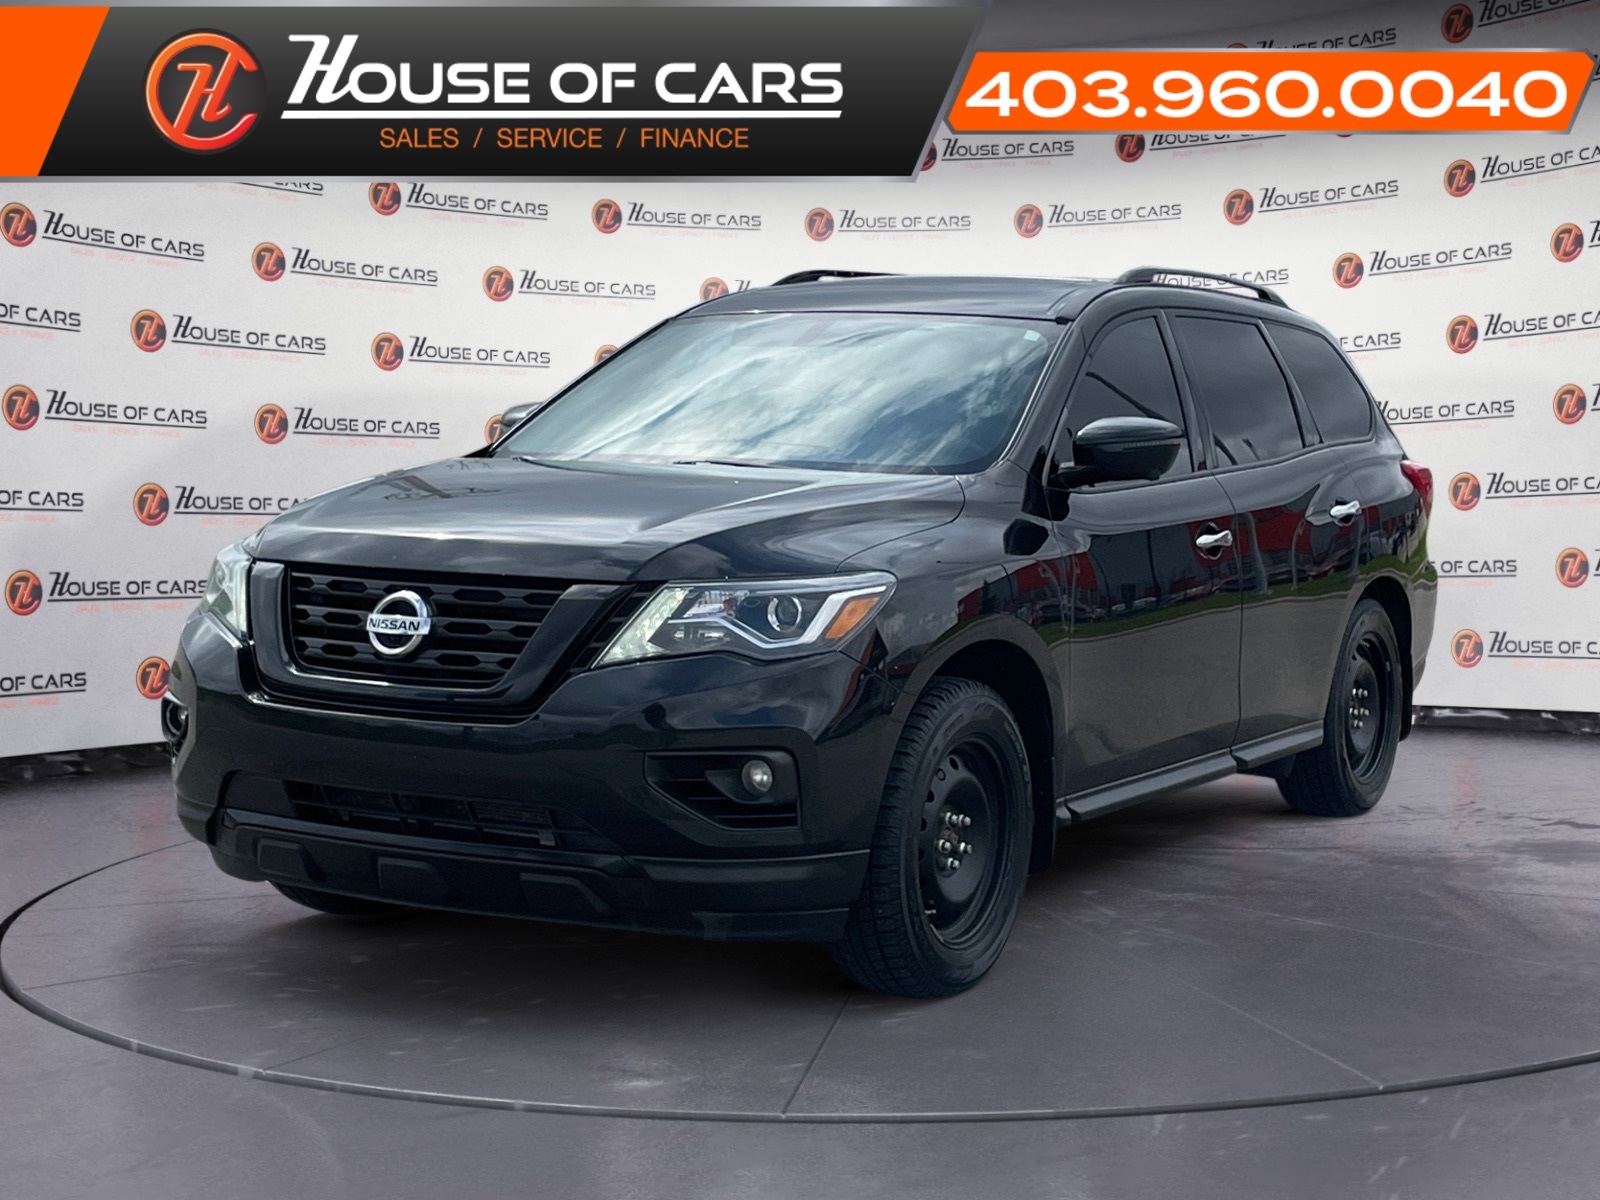 2018 Nissan Pathfinder 4x4 S/ Leather/ Heated Seats/ 3rd Row Seating